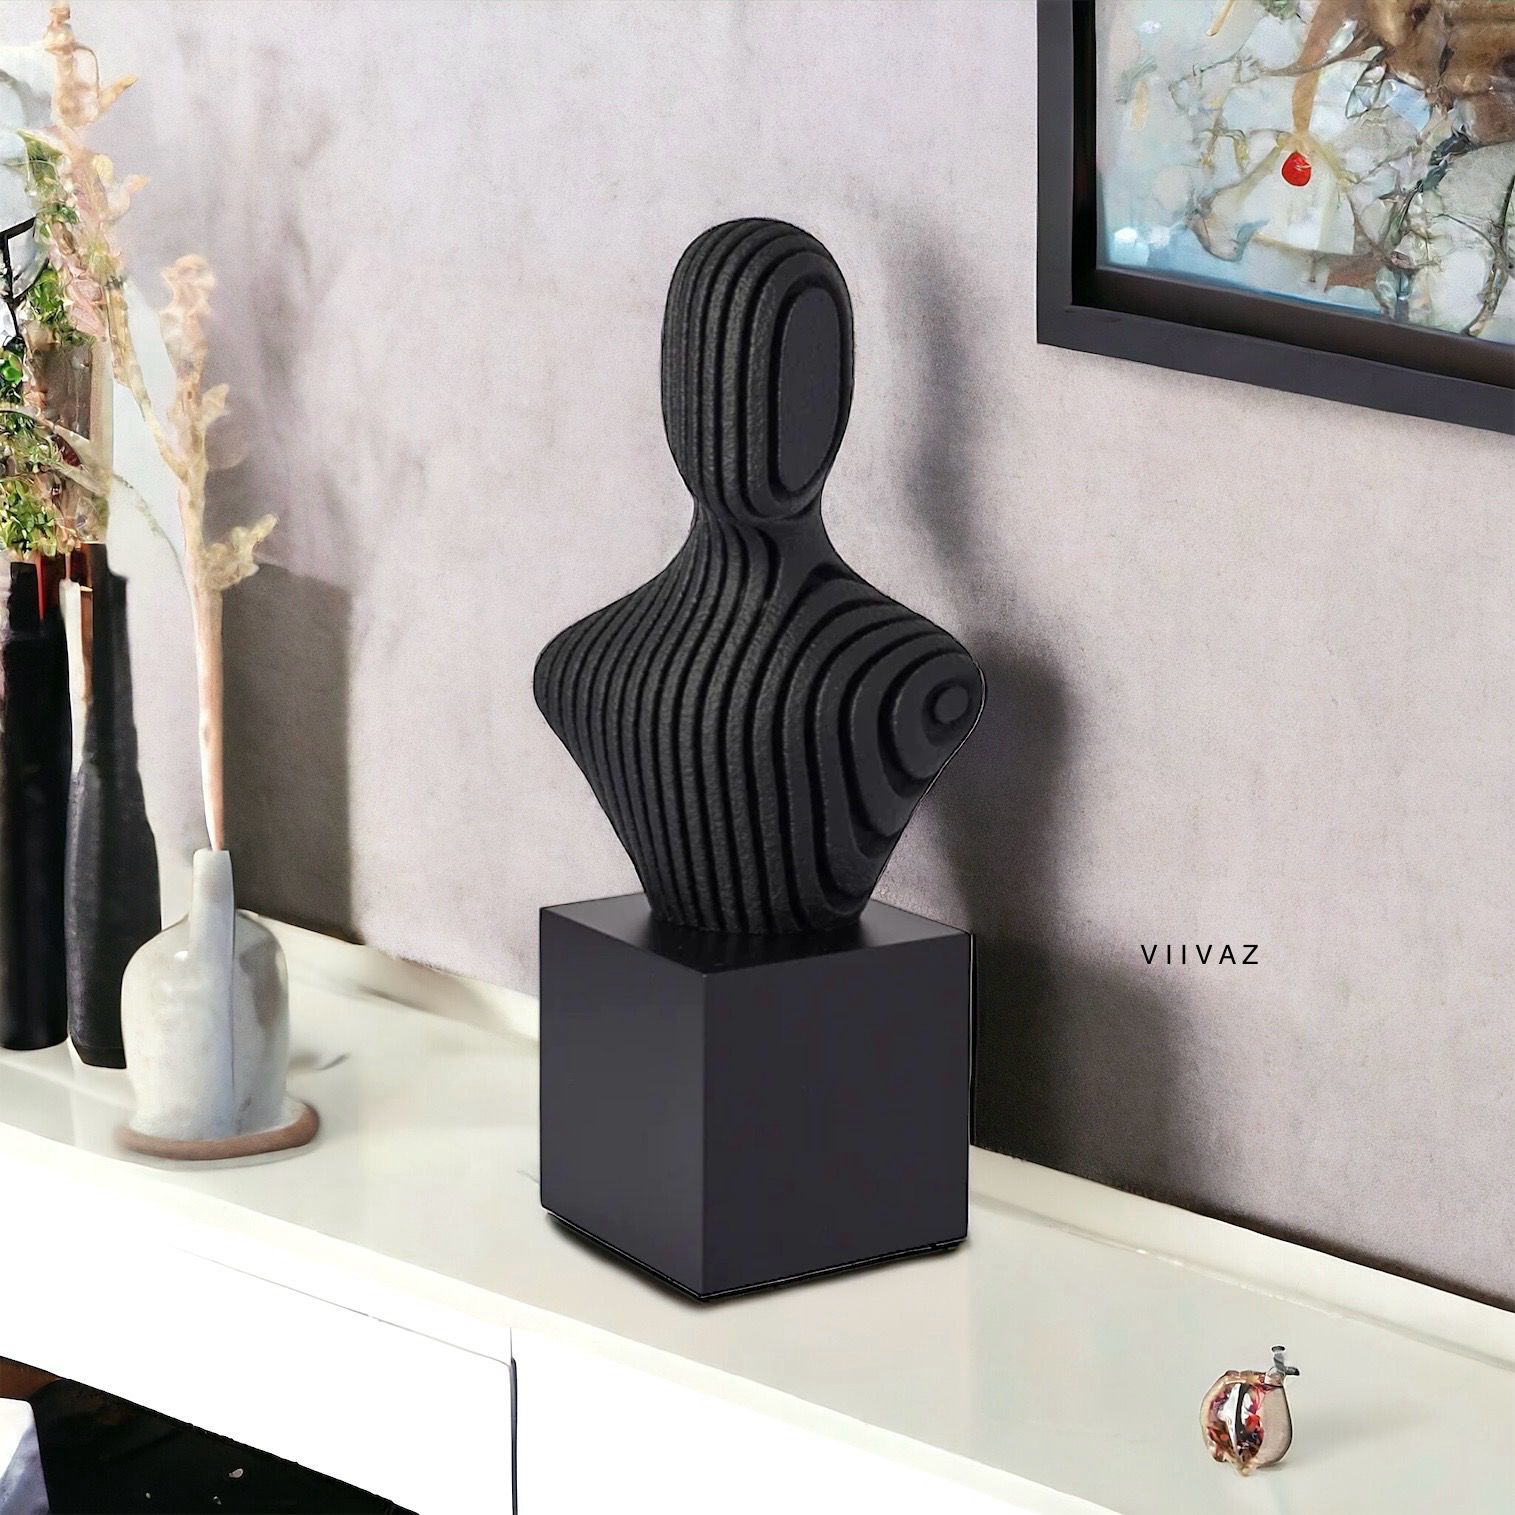 Abstract Spiral Figurine